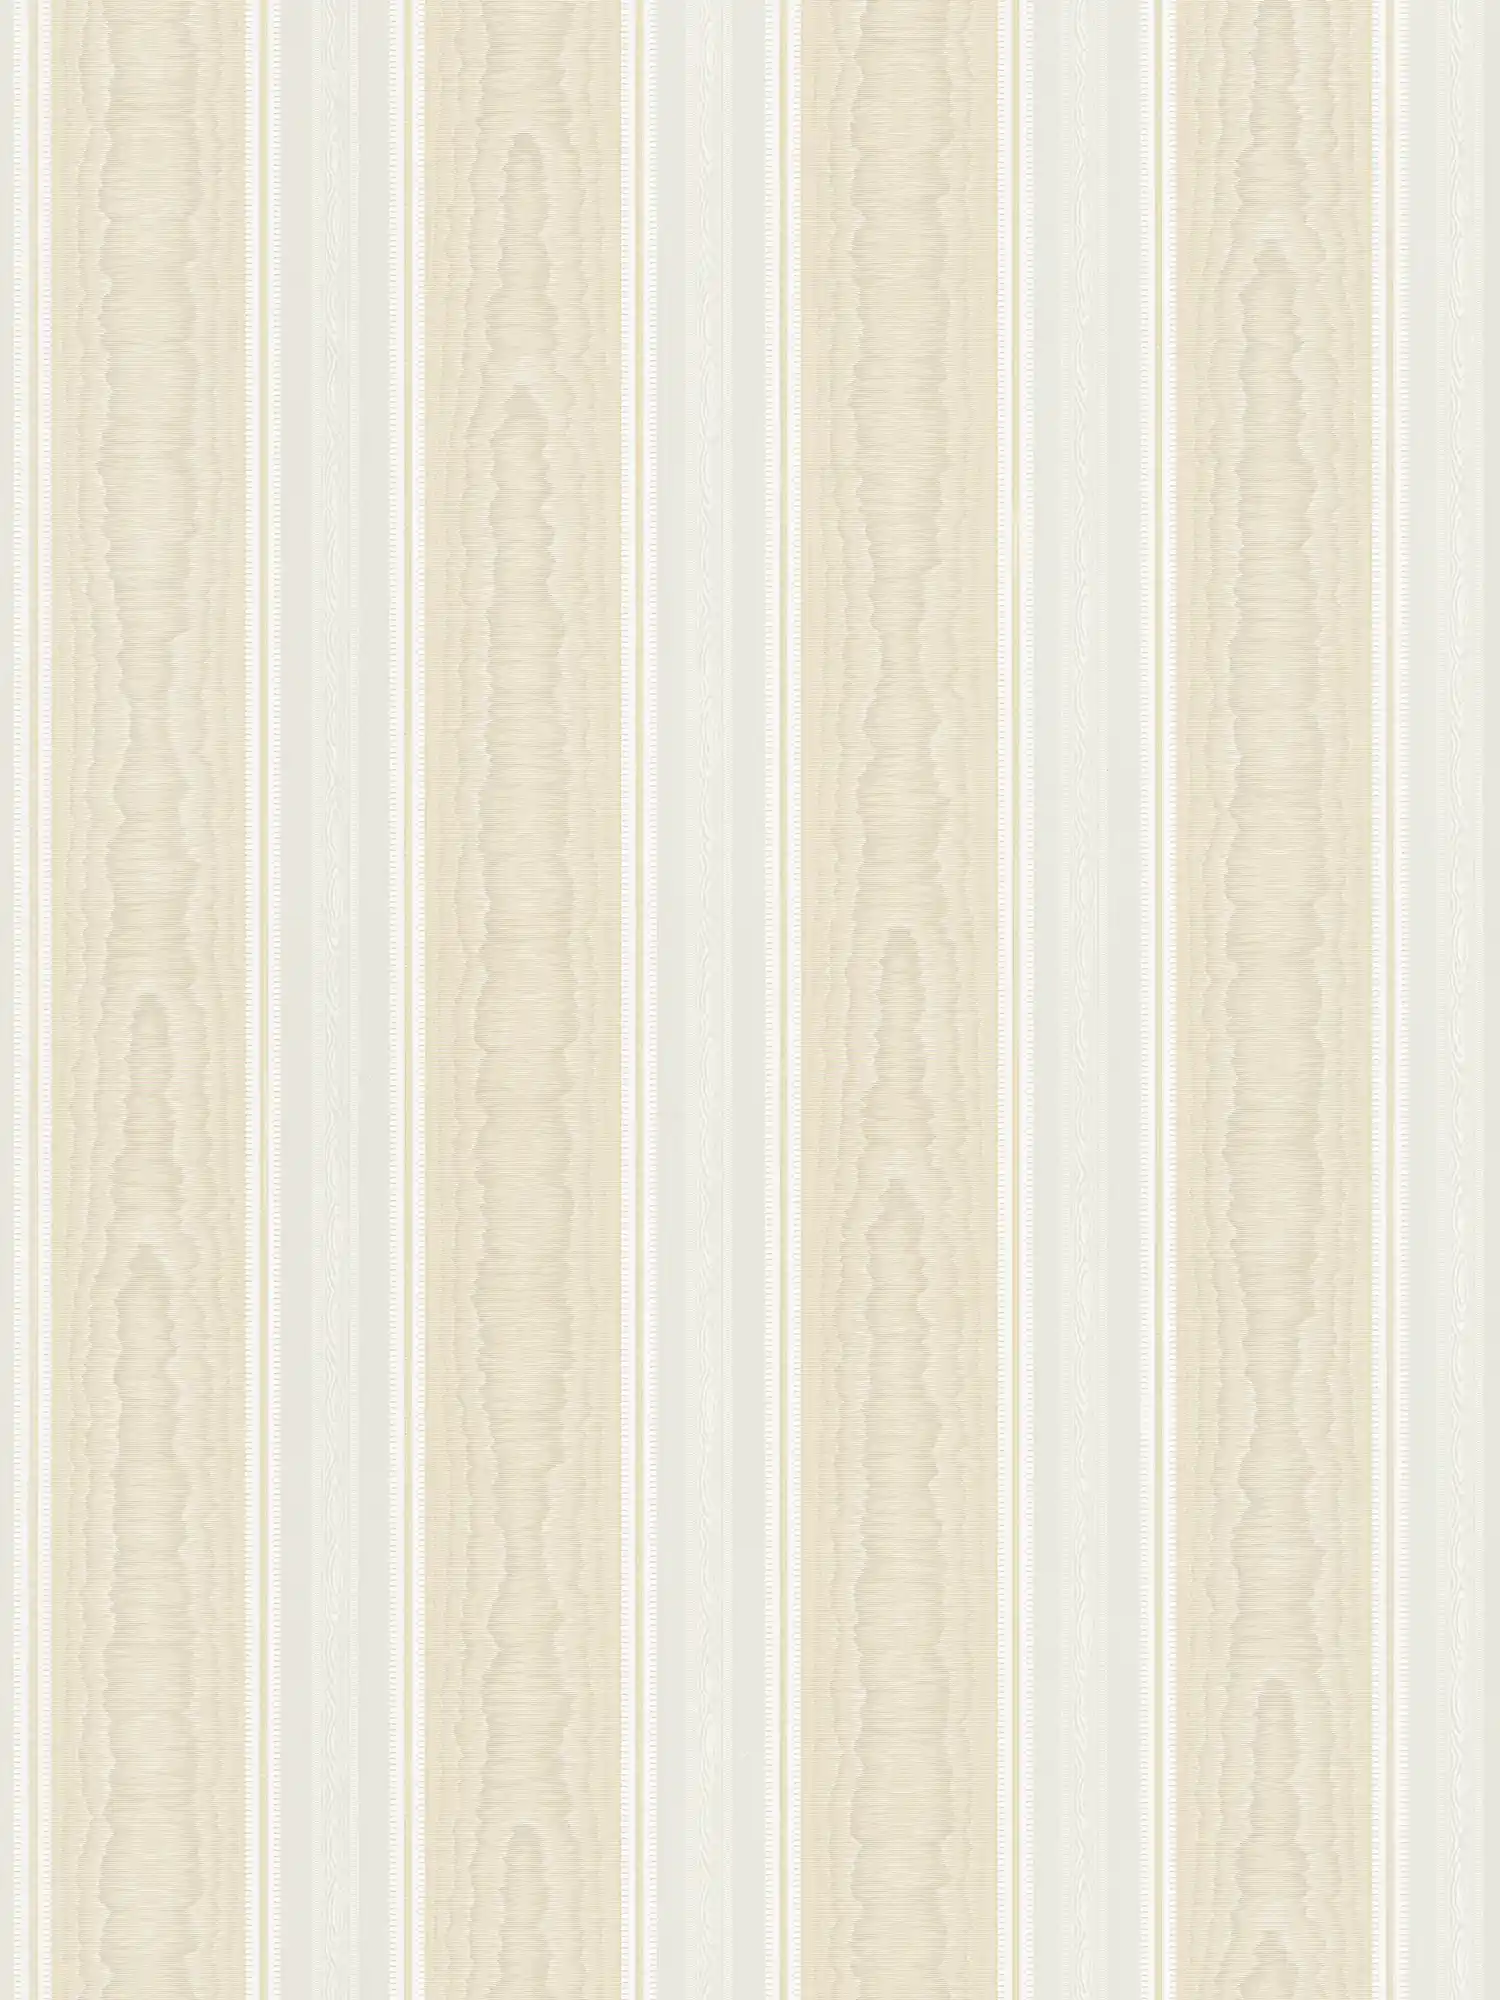 Striped wallpaper with silk moiré effect - beige, white
